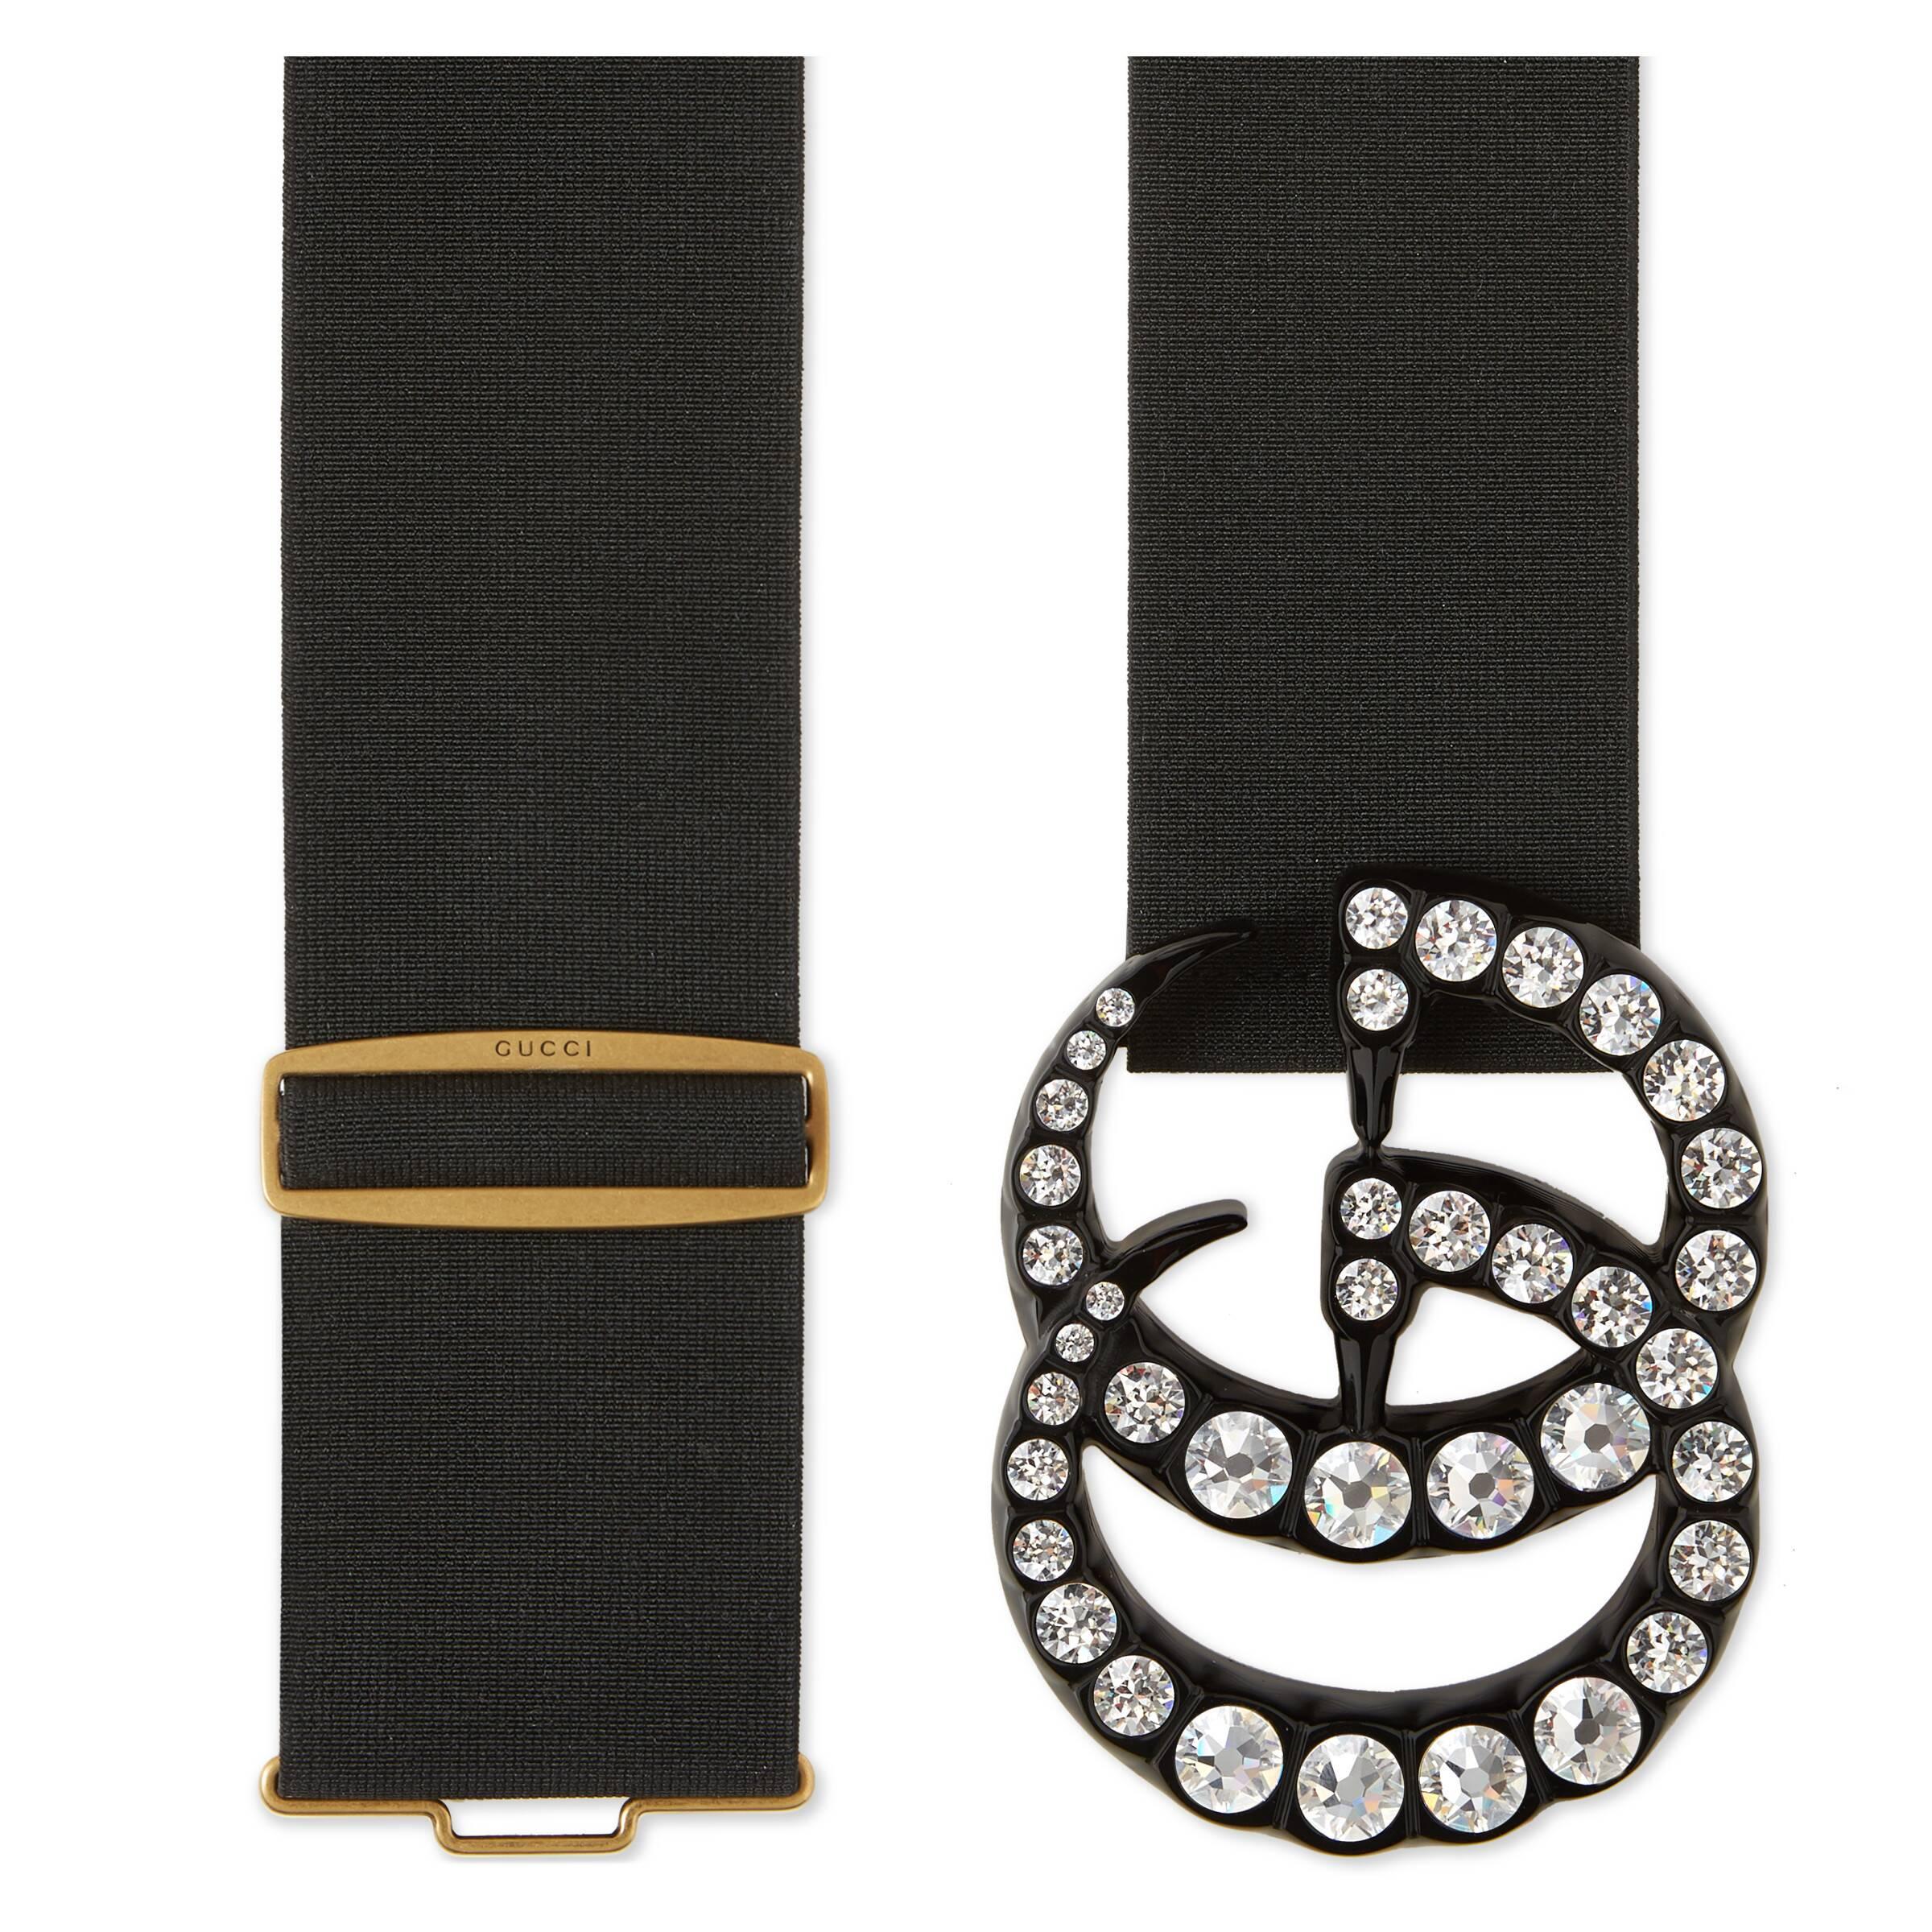 Black Leather Belt With Double G Buckle & Sparkling Crystals